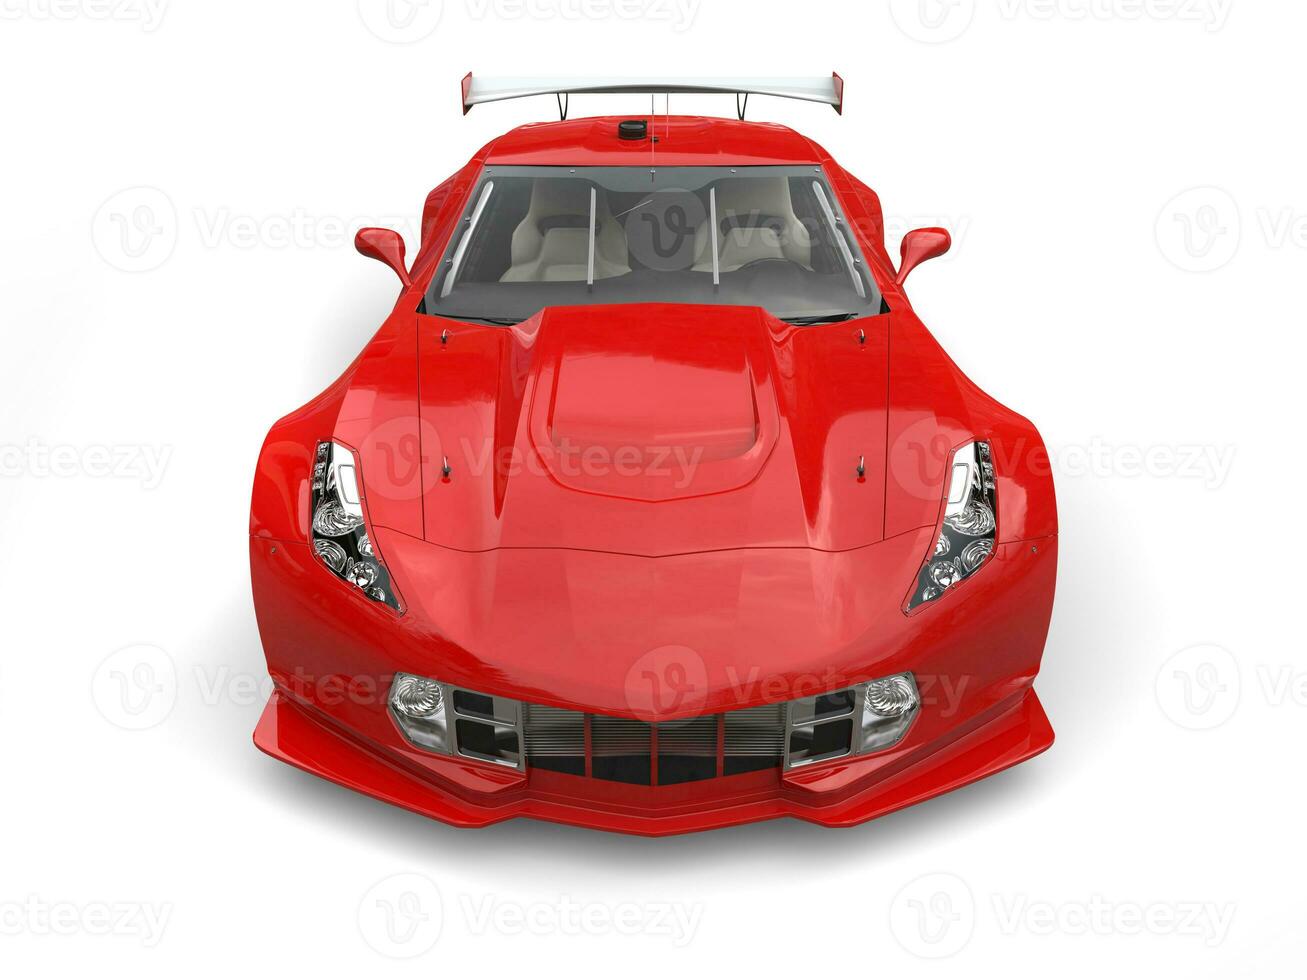 Raging red endurance race car - front view closeup photo